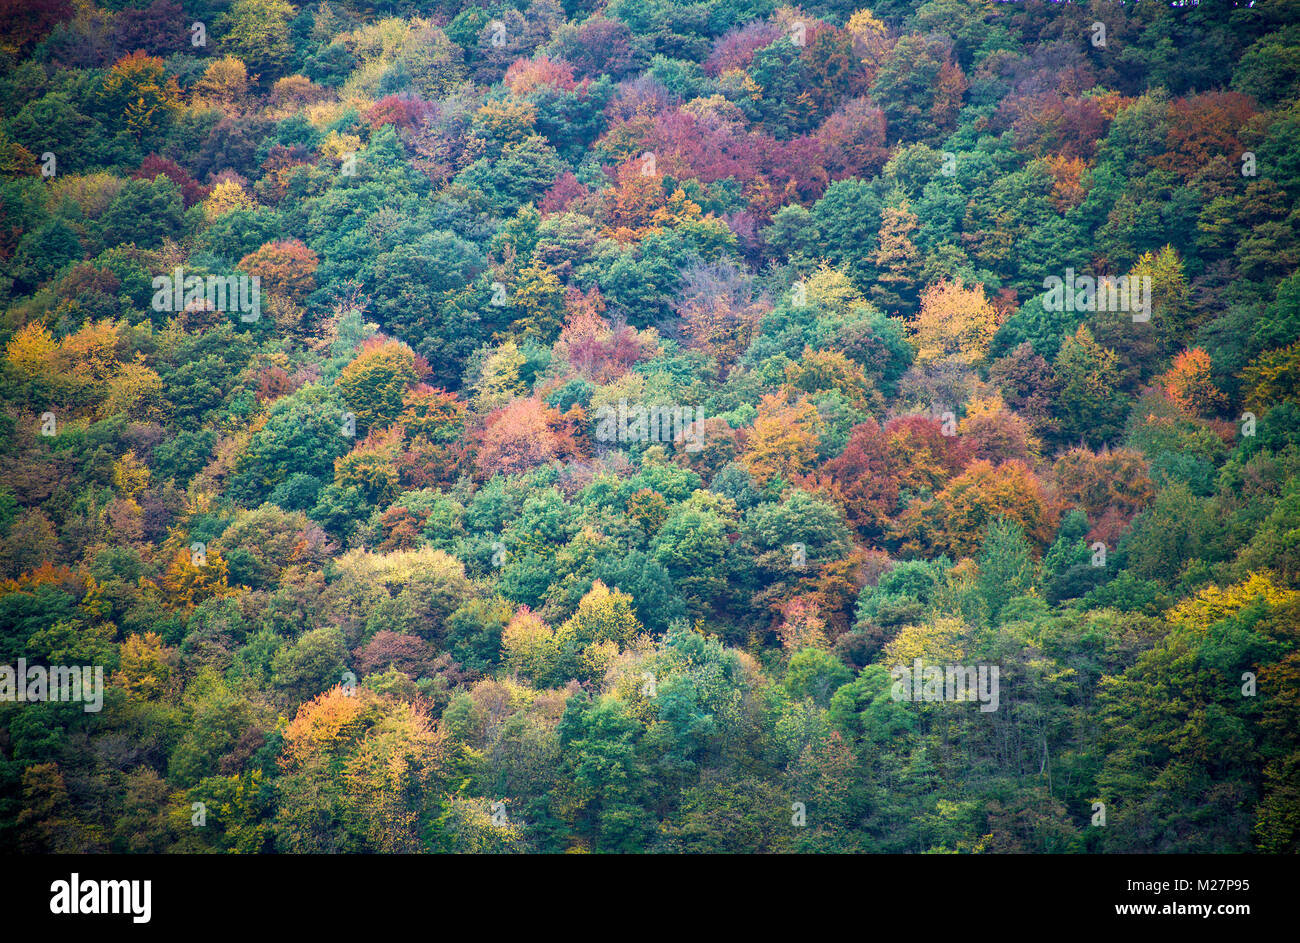 Autumn colours, mixed forest at fall, Neumagen-Dhron, Moselle river, Rhineland-Palatinate, Germany, Europe Stock Photo